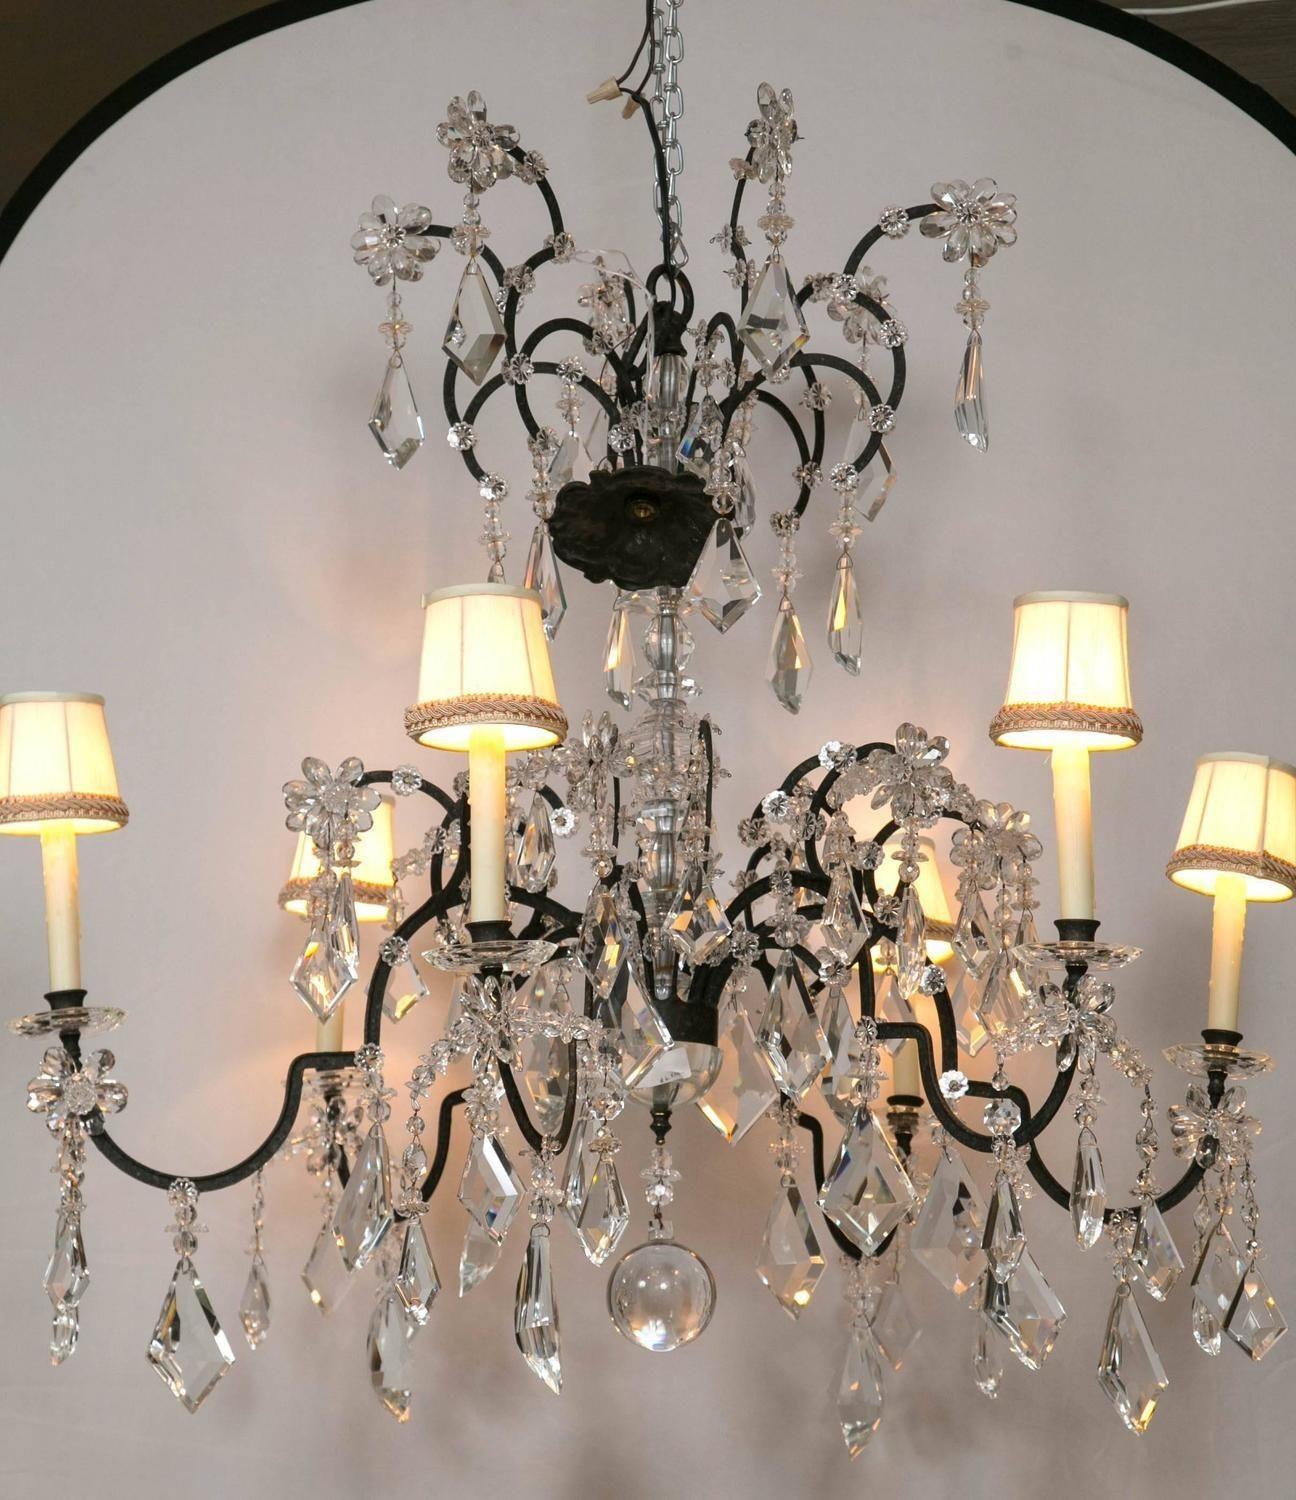 A Holly Hunt Wrought Iron and Crystal Chandelier.
 
From a spectacular home on the North Shore of Long Island comes this fine Holly Hunt wrought iron and crystal chandelier. This iconic designers style and flair are shown at every angle of this